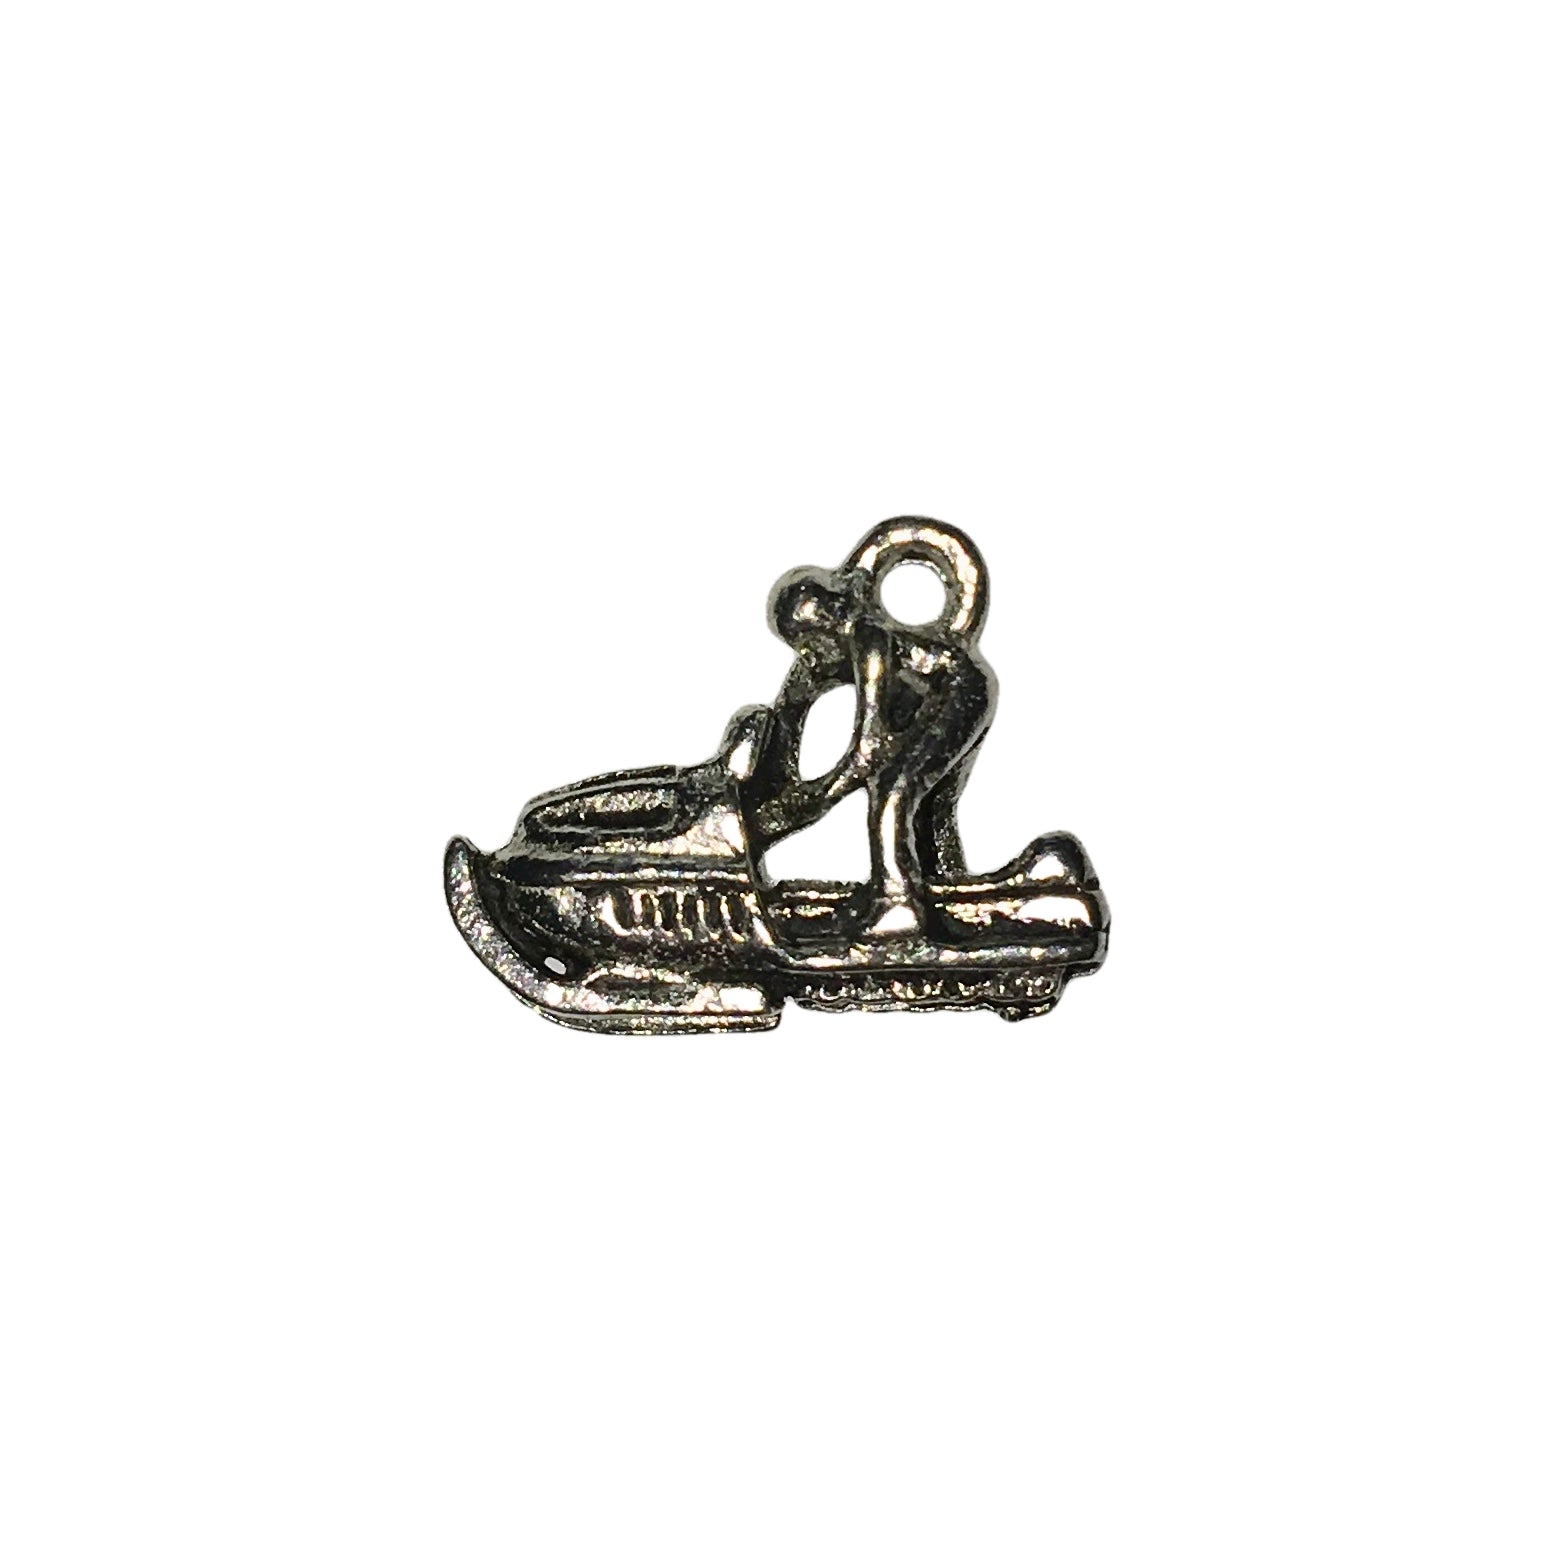 Snow Mobile Charms - Qty 5 - Lead Free Pewter Silver - American Made